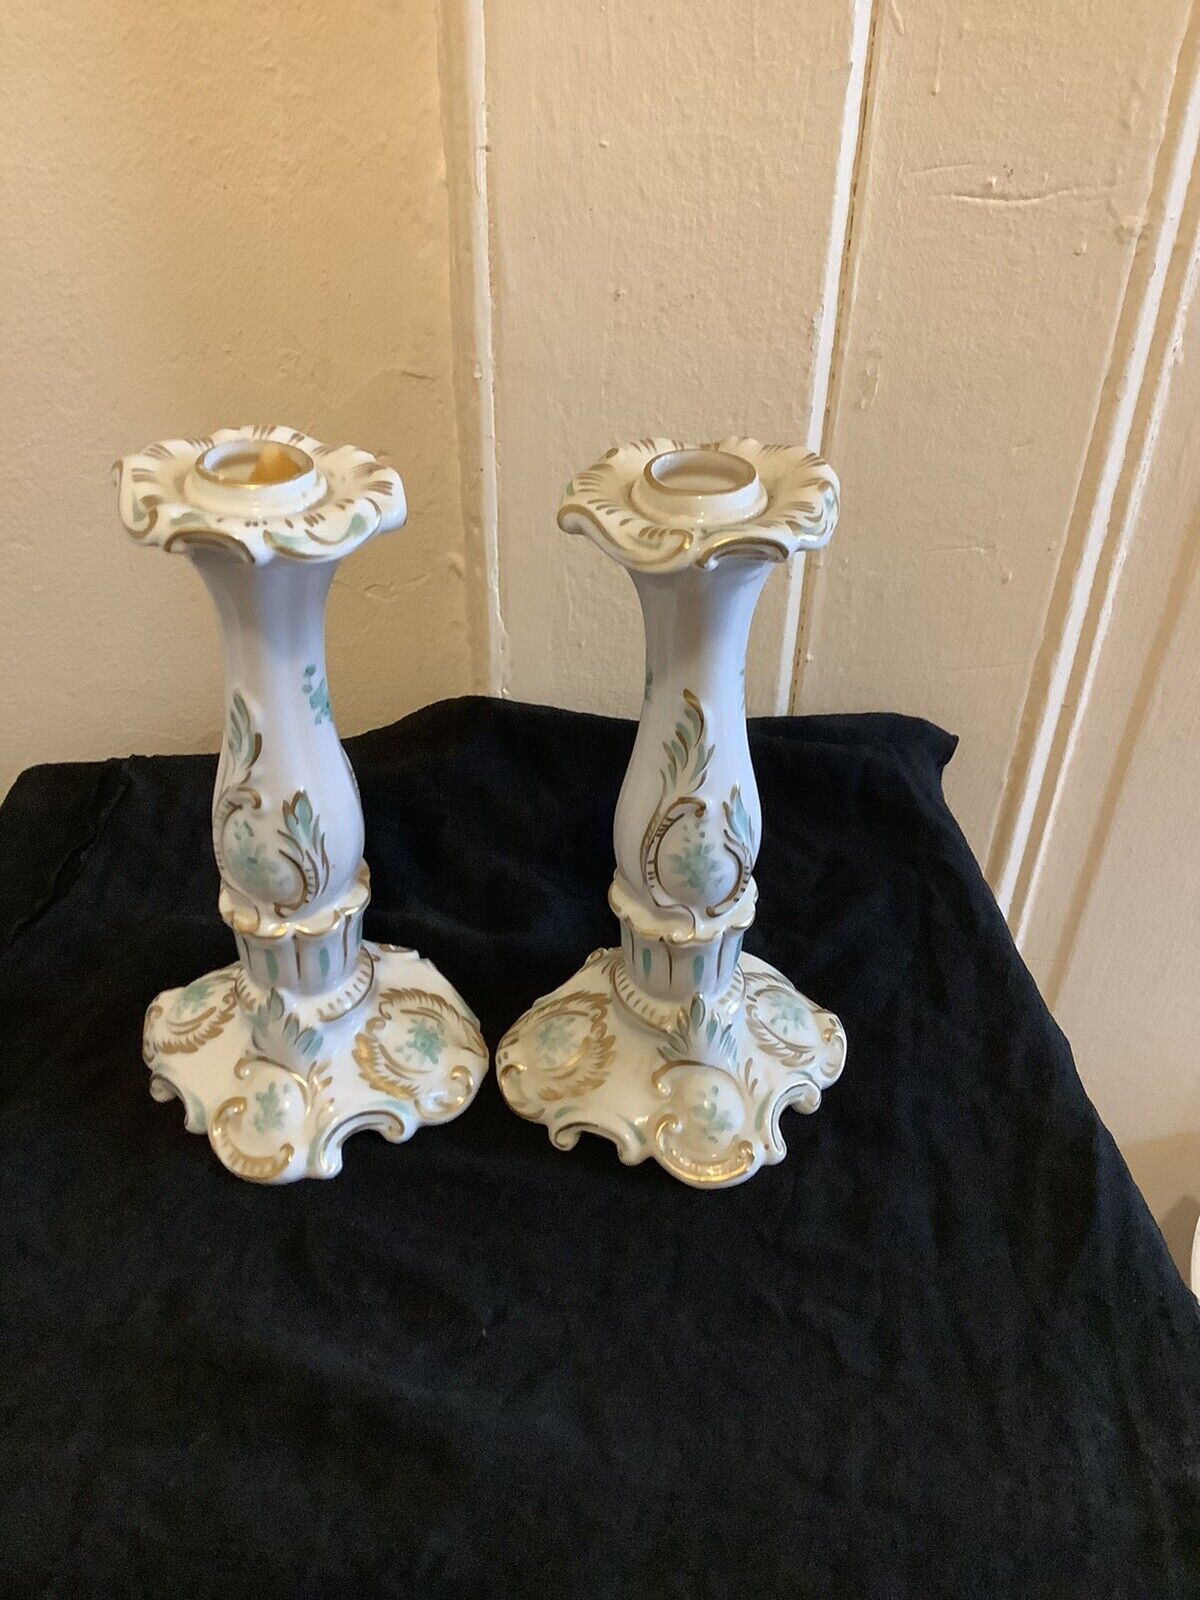 A Pair Of Candle Holder Vintage.